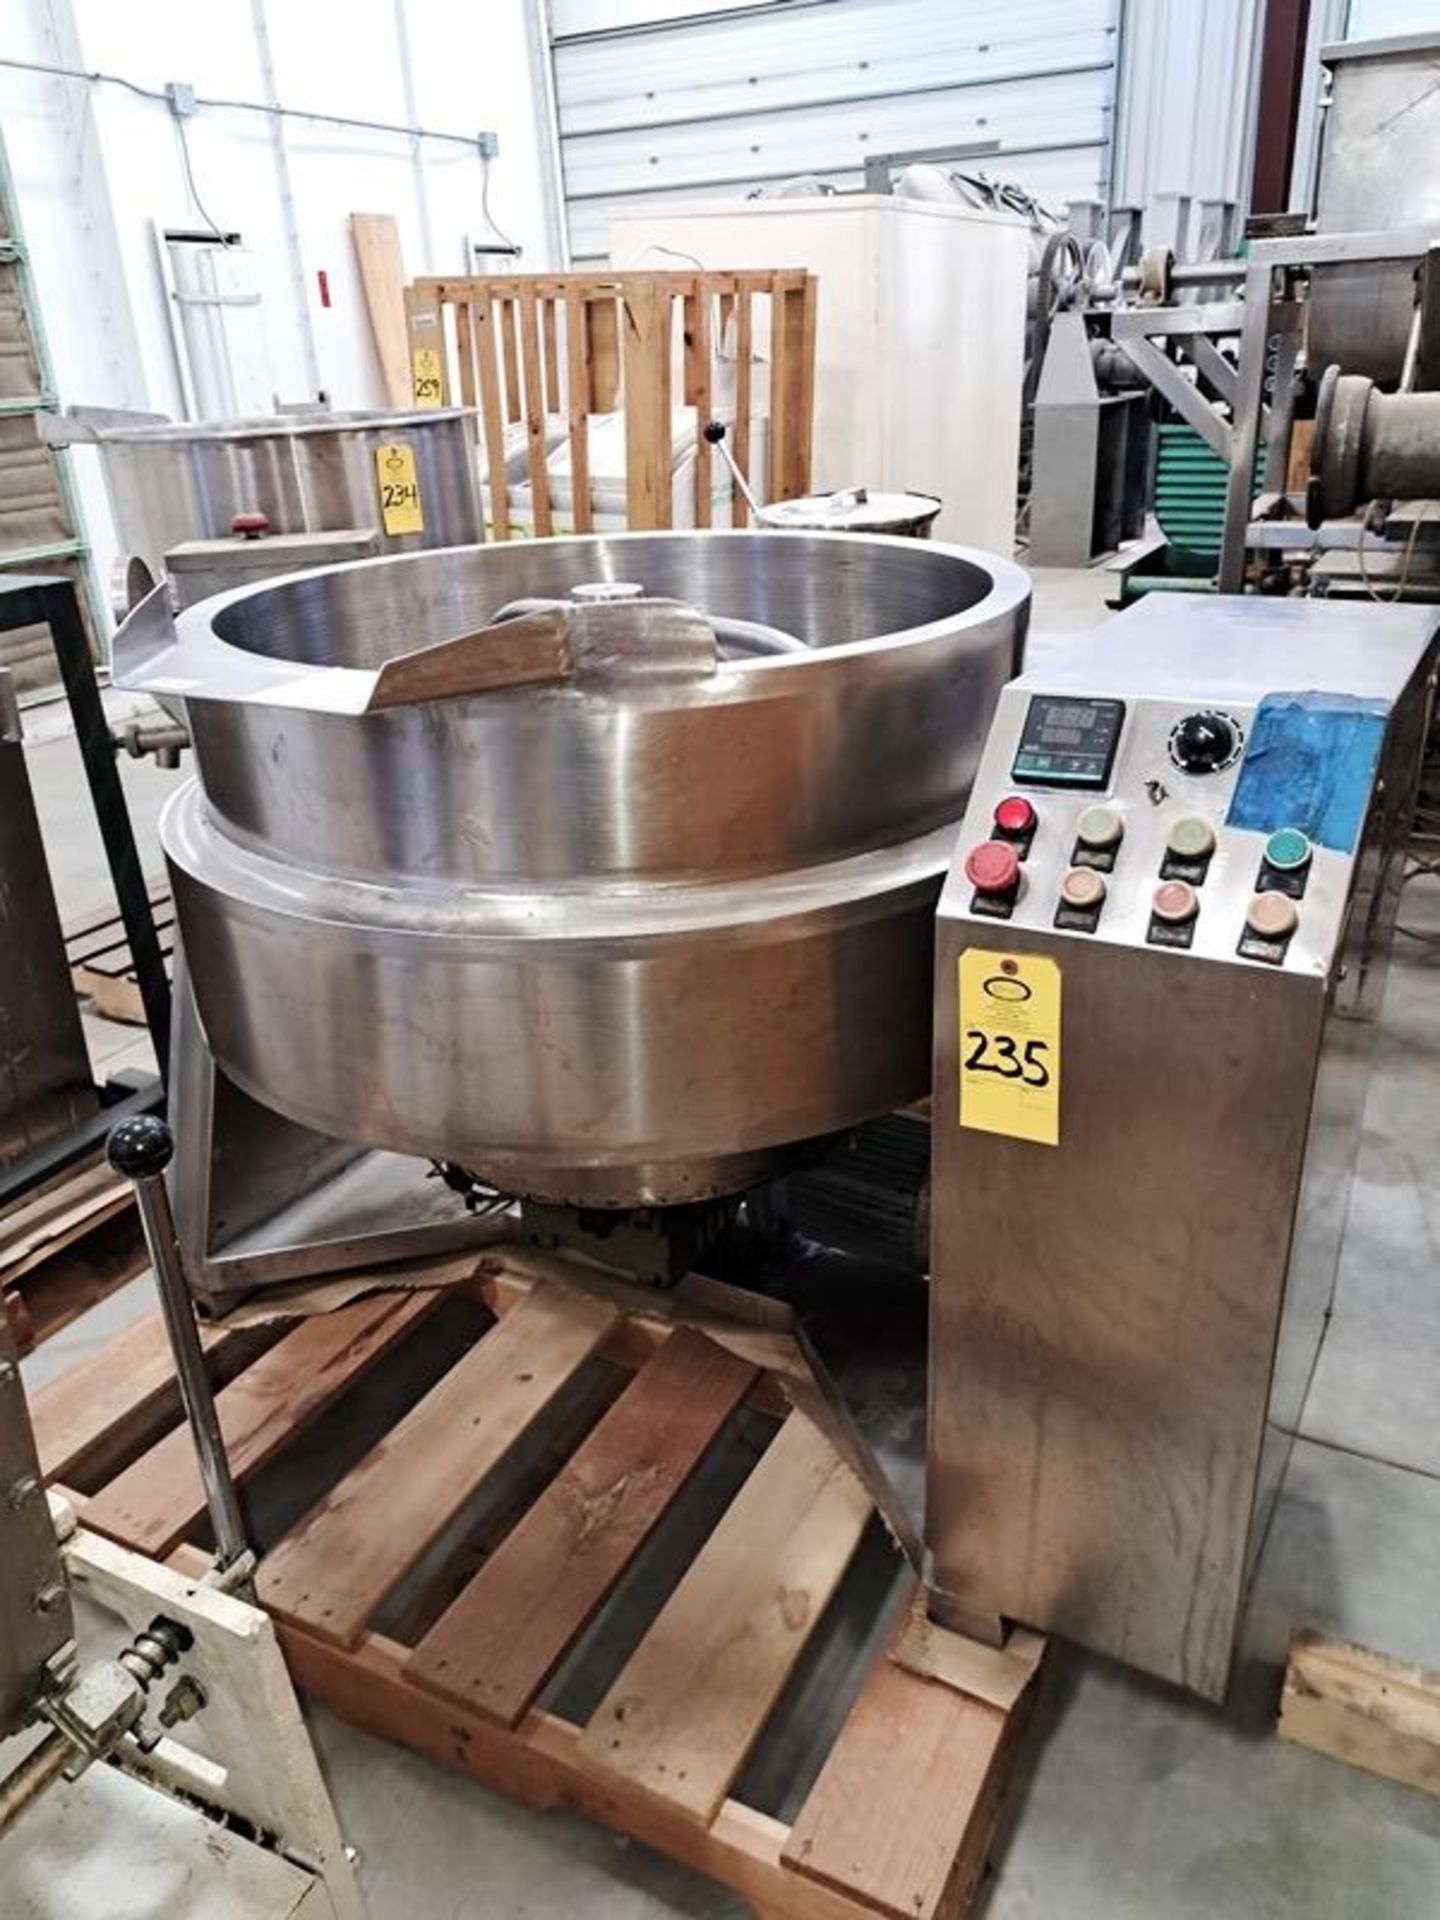 Baoding Jiali Mdl. JL-XKJG-Q Stainless Steel Jacketed Kettle, 150 liter, tilt out with side and